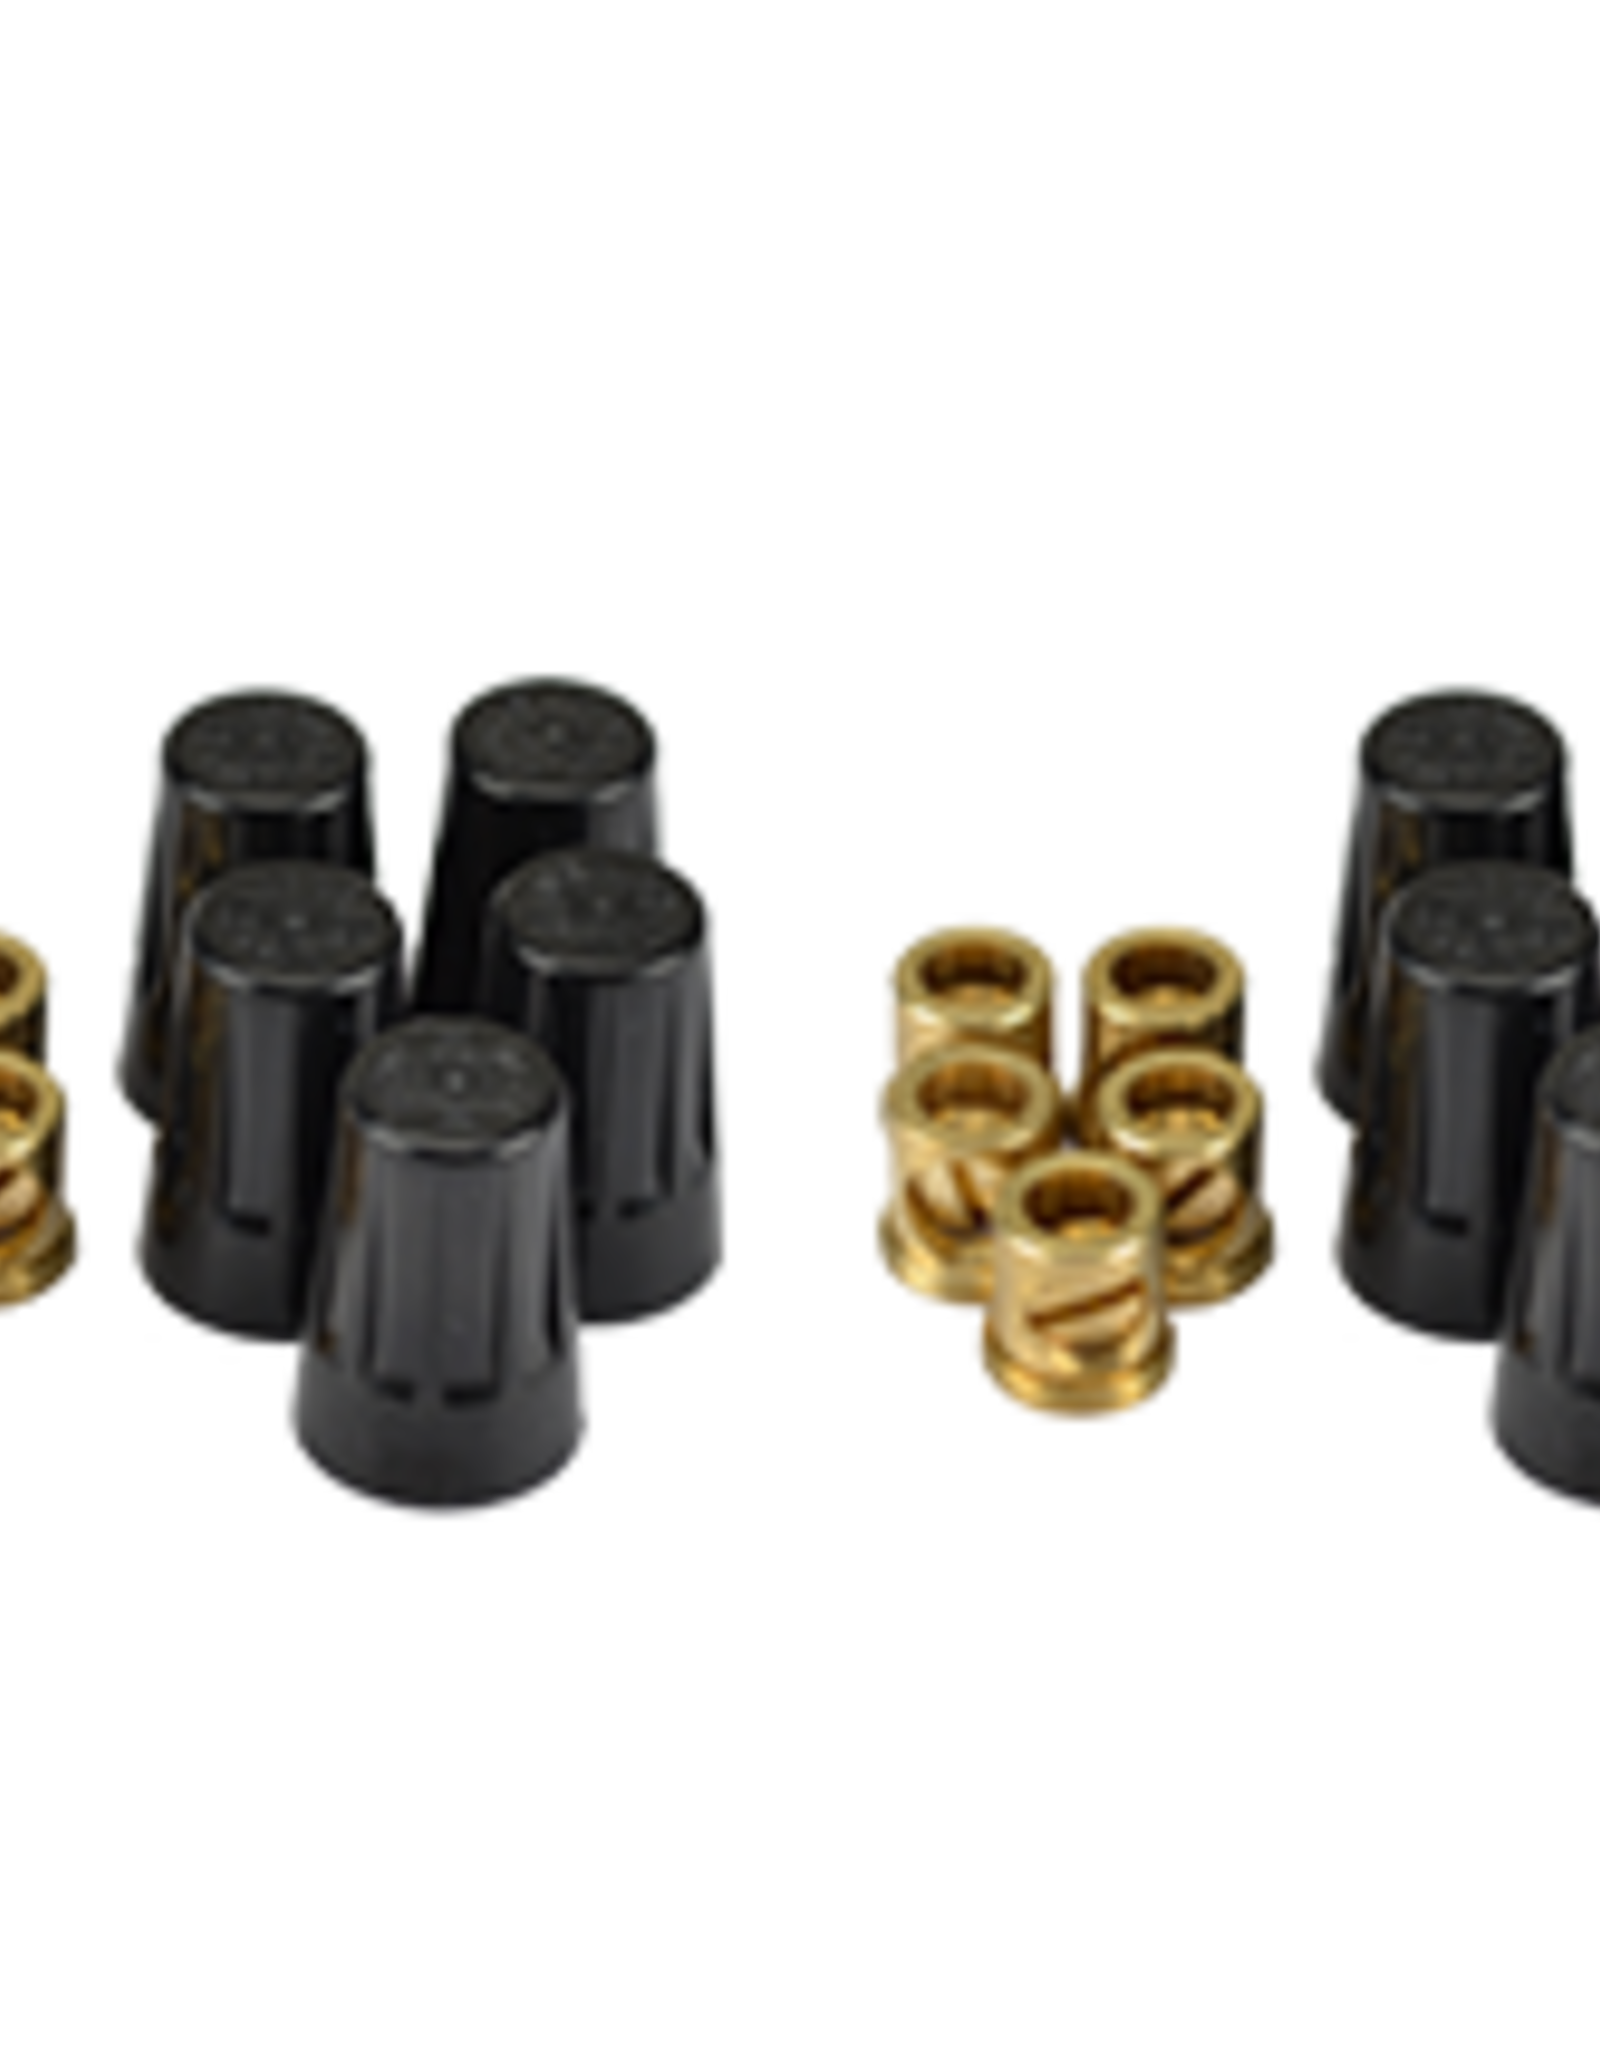 Unique Lighting Systems Lugnuts With Grease Tubes (10pk)